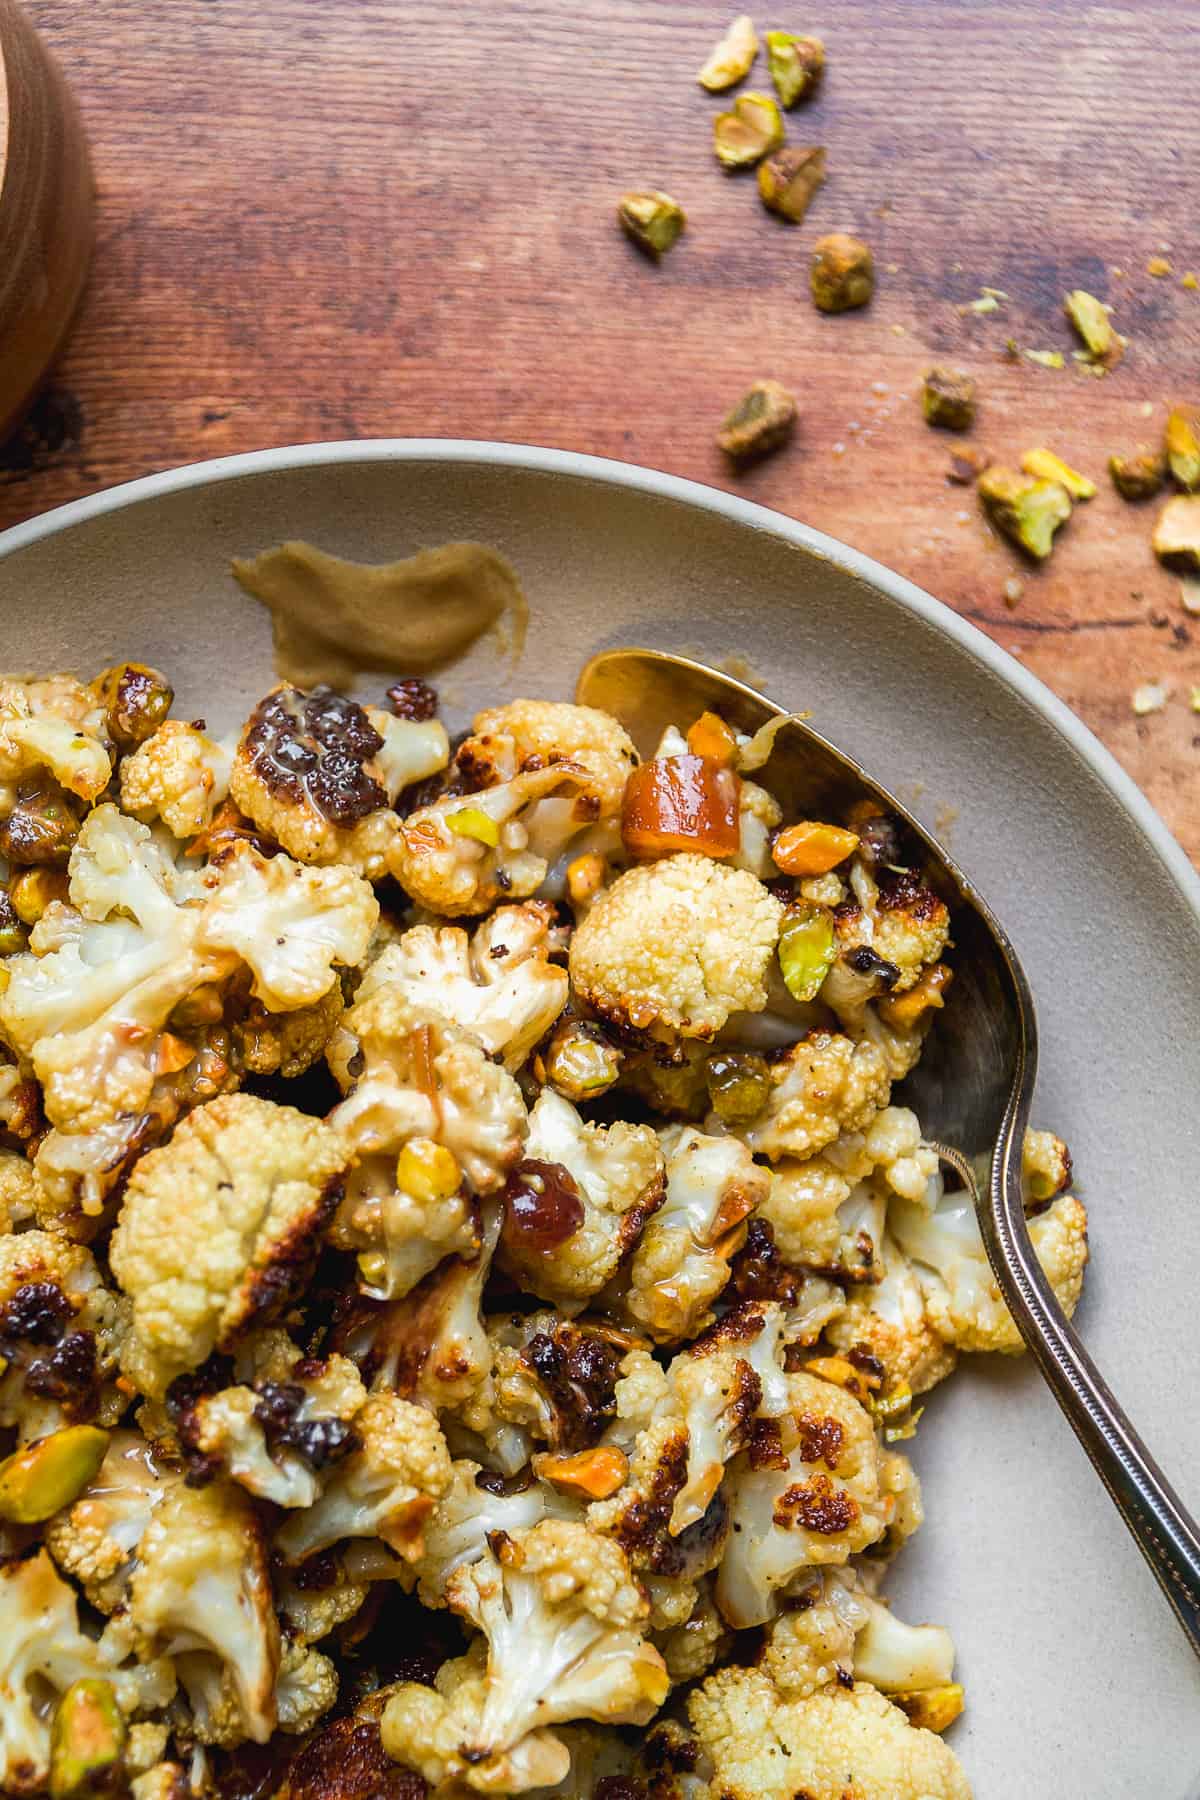 Tahini roasted cauliflower on a platter with dates and pistachios.